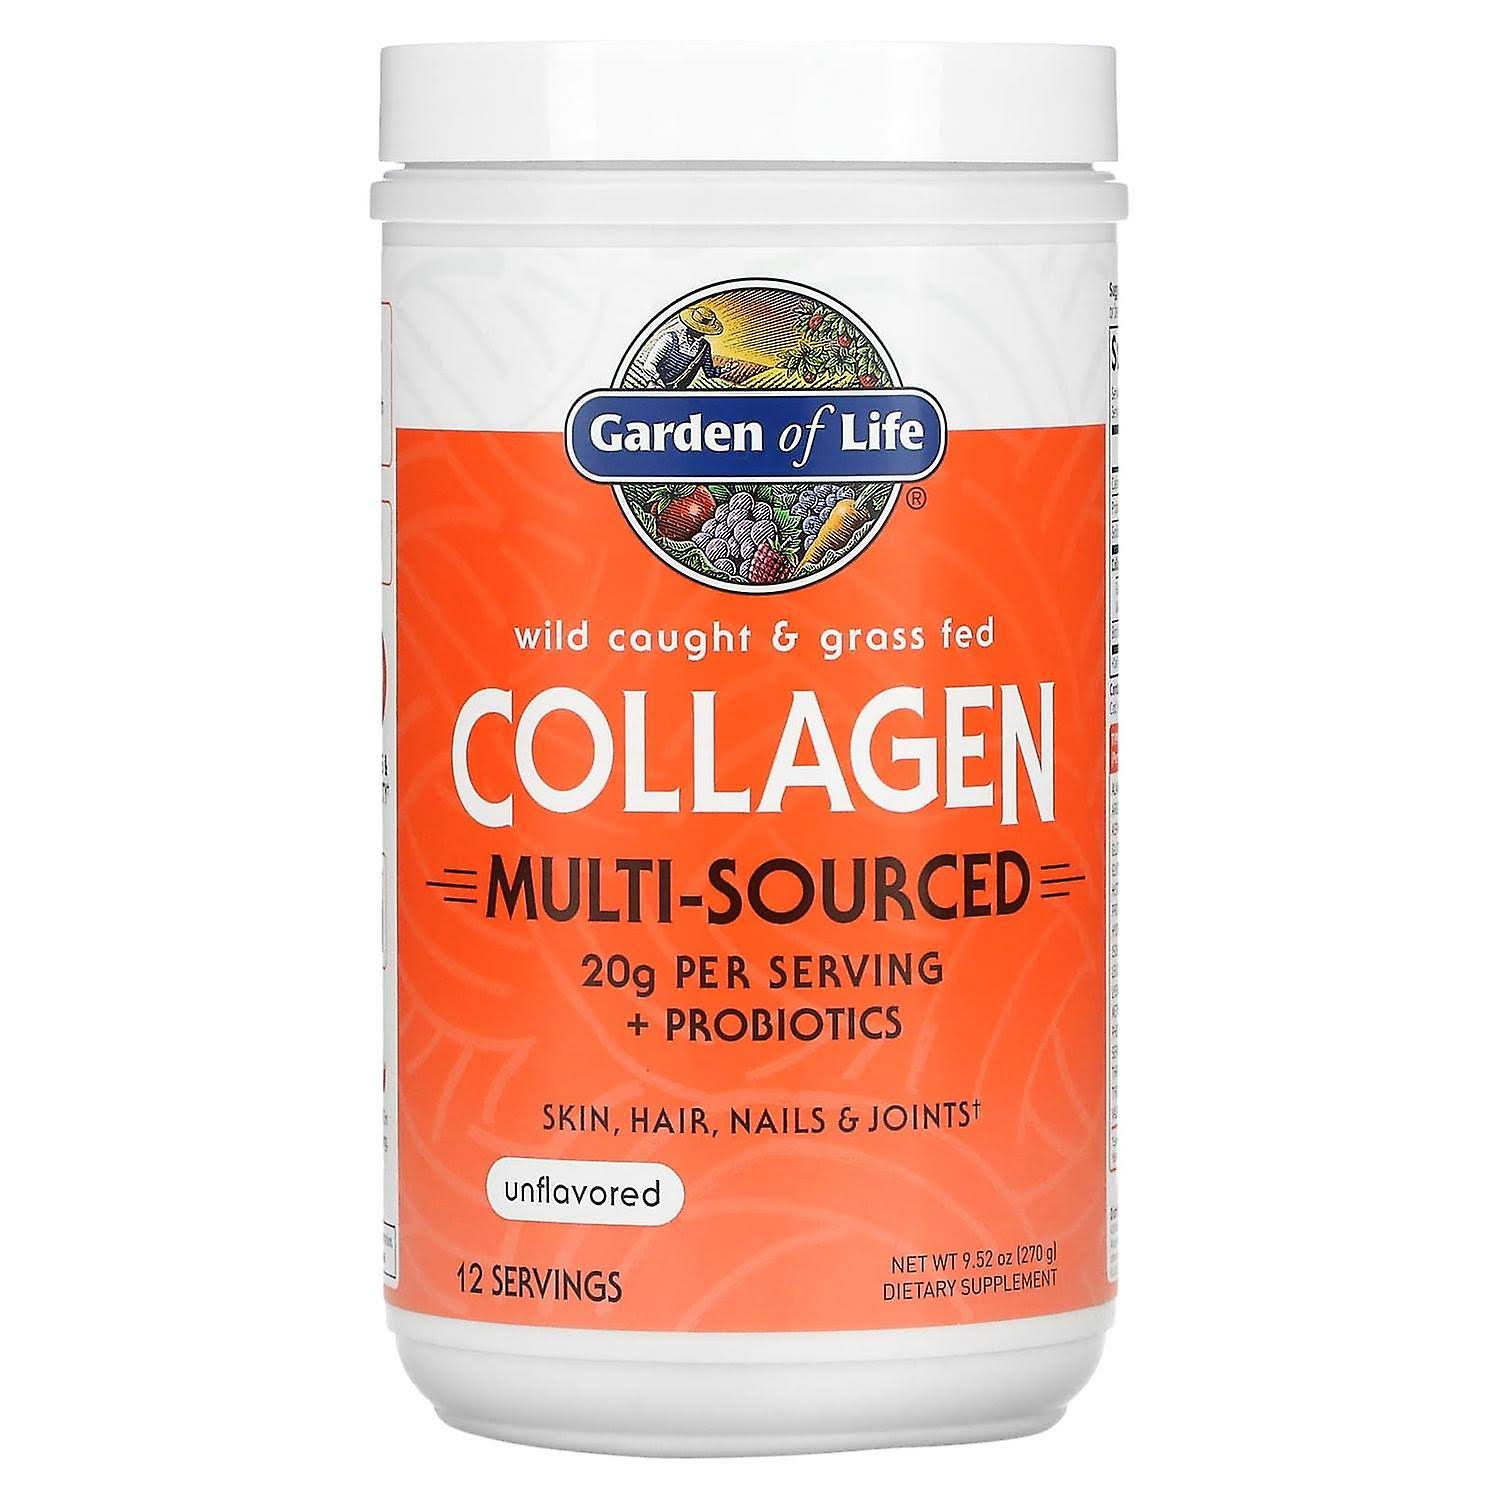 Garden of Life Wild Caught & Grass FED Collagen Multi-Sourced Unflavored 270 Grams